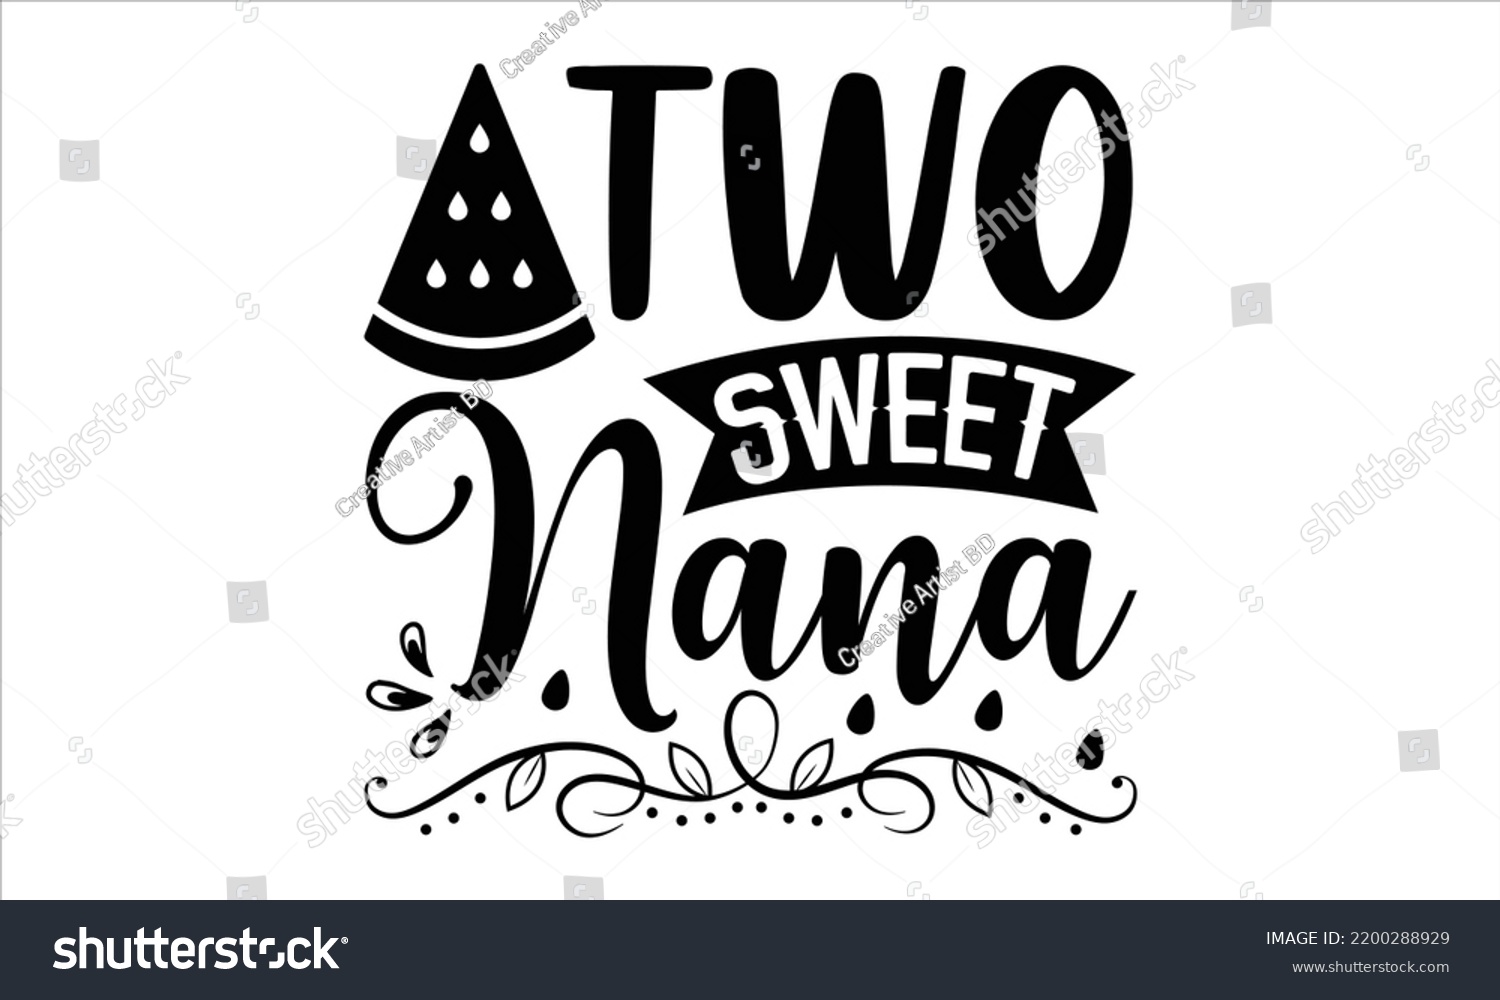 SVG of Two Sweet Nana - Watermelon T shirt Design, Modern calligraphy, Cut Files for Cricut Svg, Illustration for prints on bags, posters svg